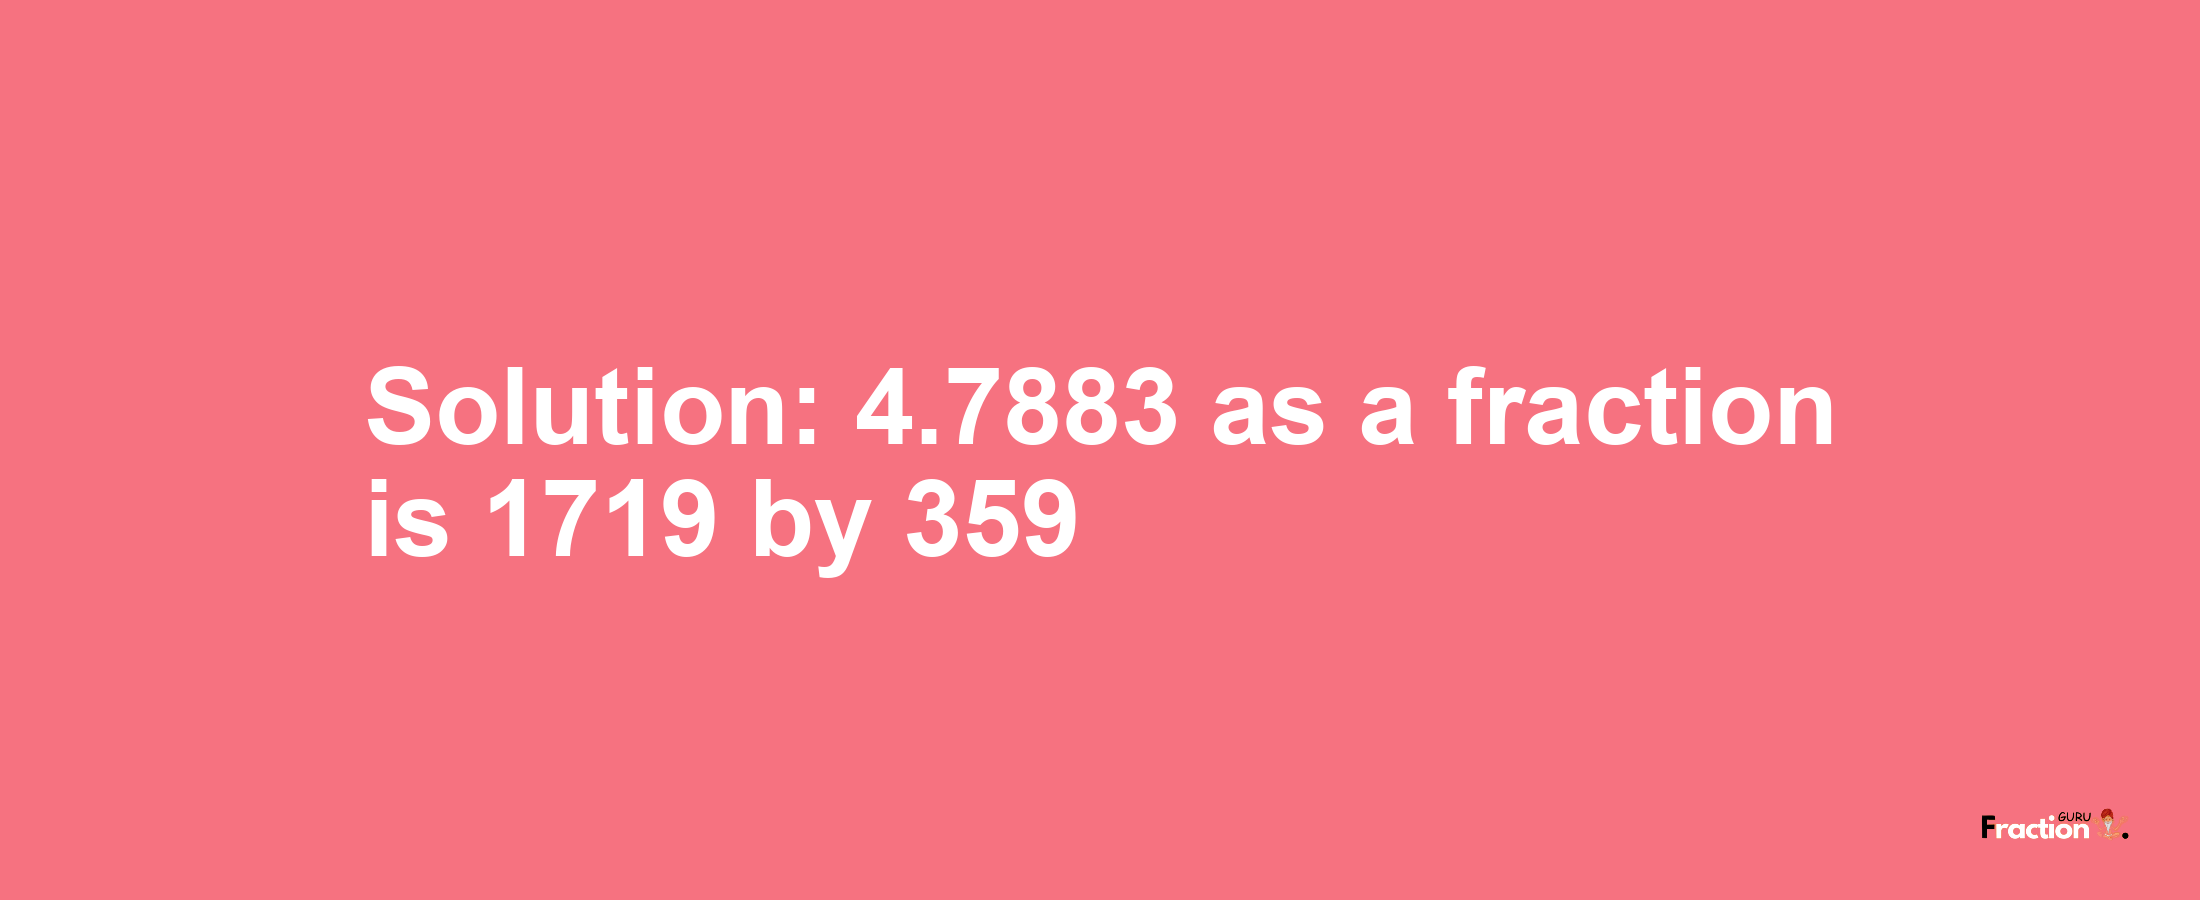 Solution:4.7883 as a fraction is 1719/359